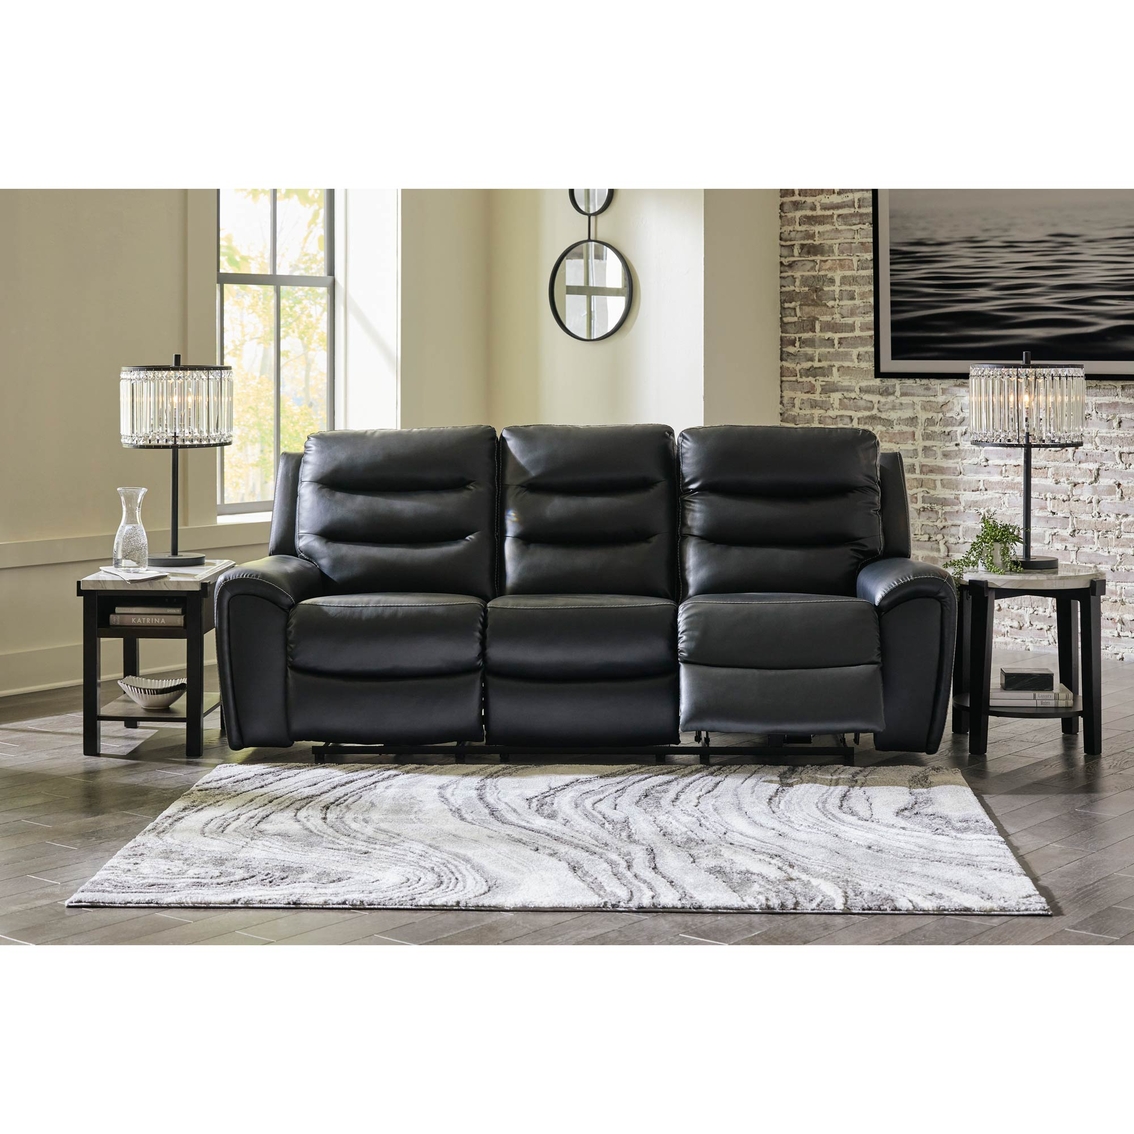 Signature Design by Ashley Warlin 3 pc. Power Reclining Set - Image 2 of 7